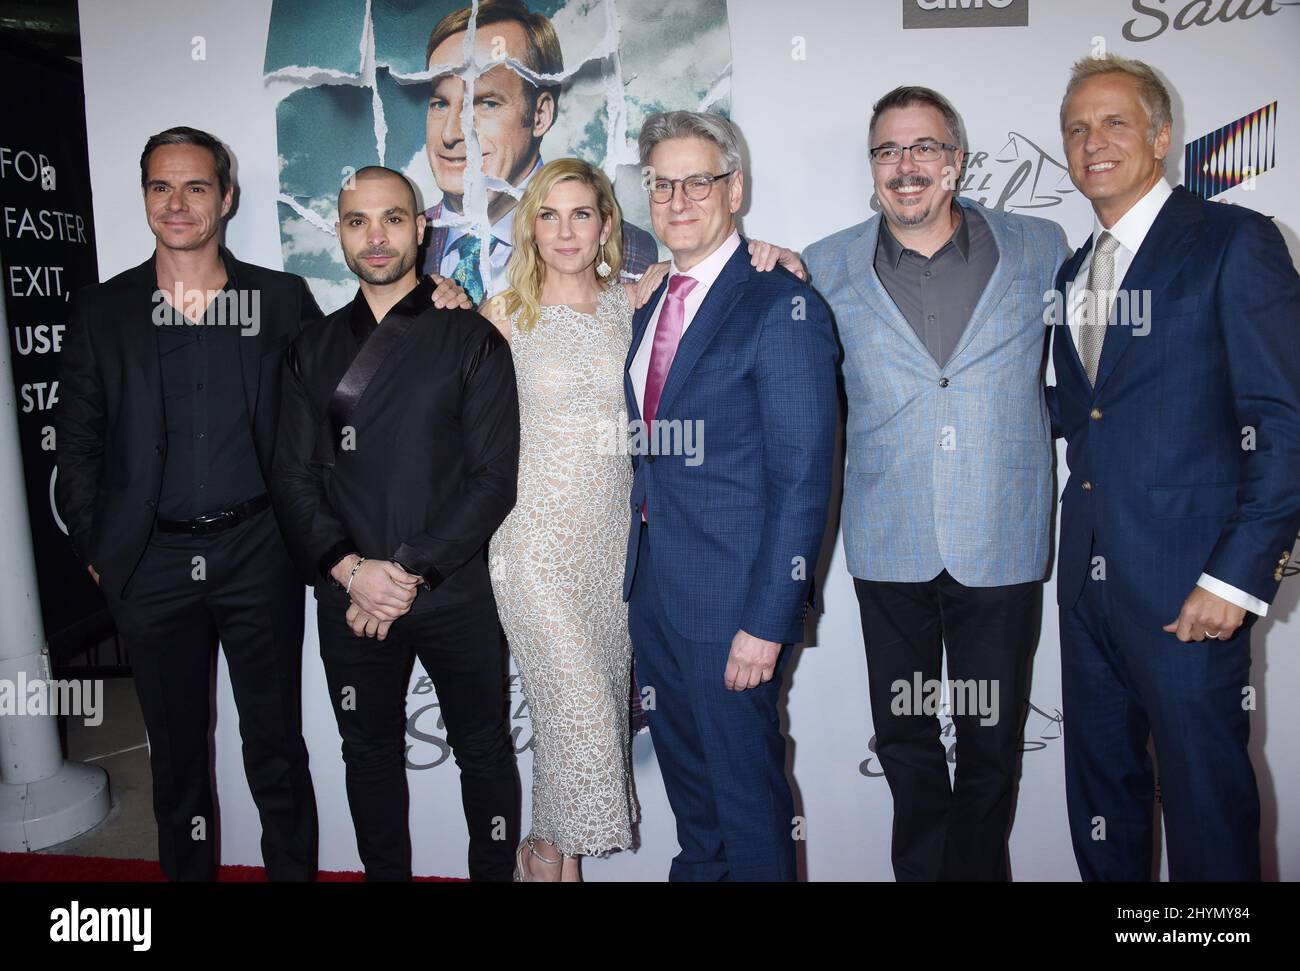 Tony Dalton, Michael Mando, Rhea Seehorn, Peter Gould, Vince Gilligan and Patrick Fabian at AMC's 'Better Call Saul' Season 5 Special Premiere Event held at the ArcLight Cinemas Hollywood on February 5, 2020 in Hollywood, CA. Stock Photo